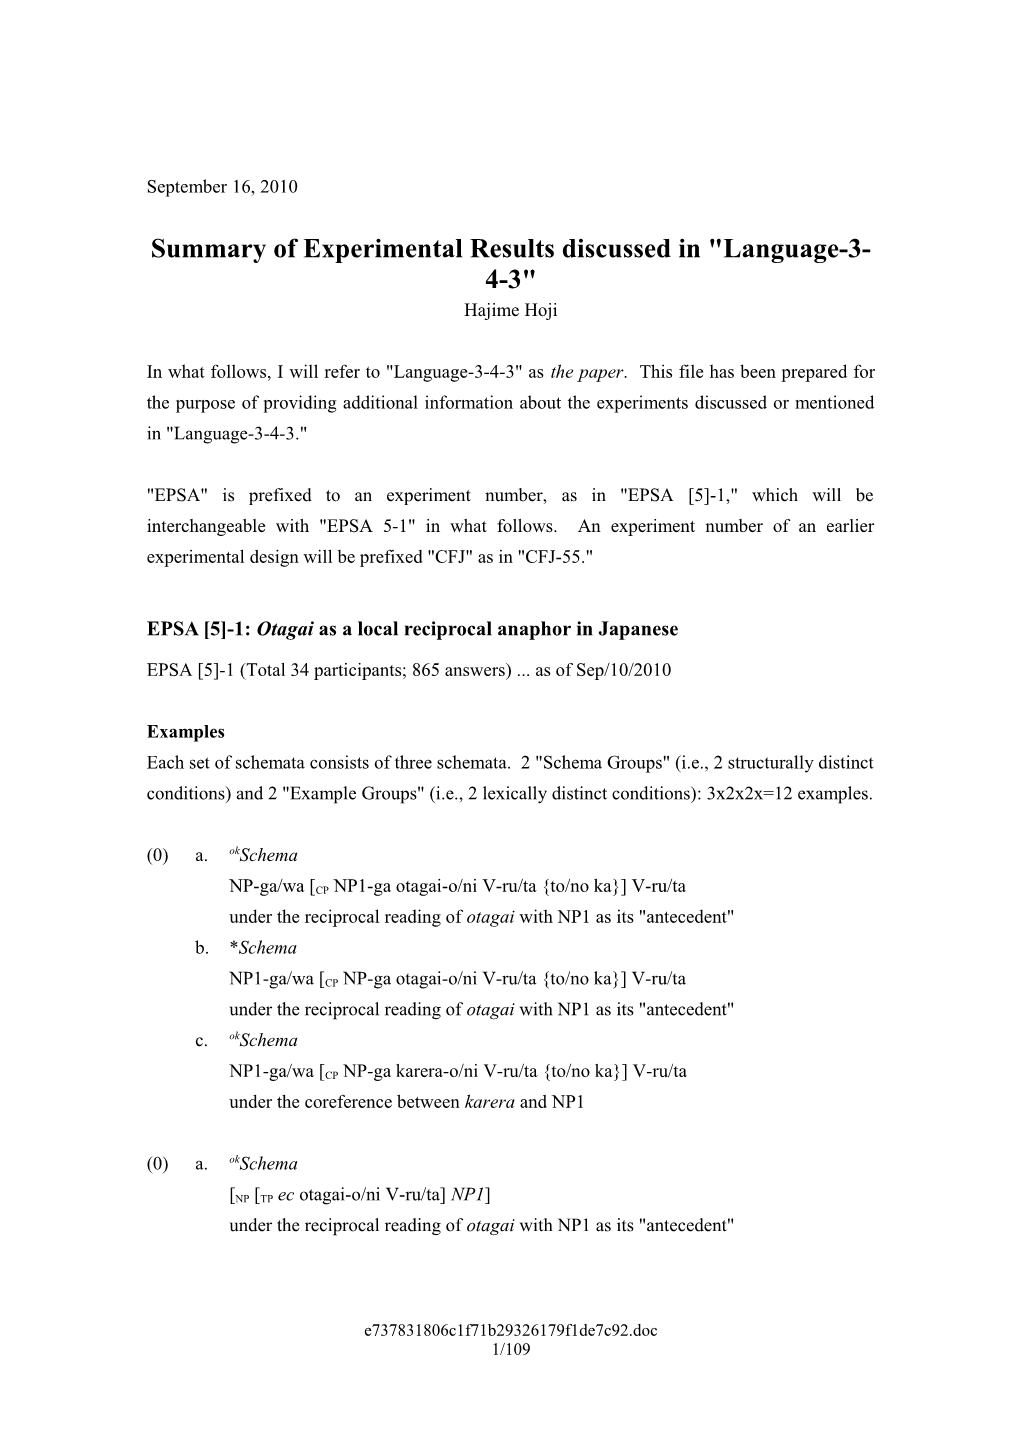 Summary of Experimental Results Discussed in Language-3-4-3